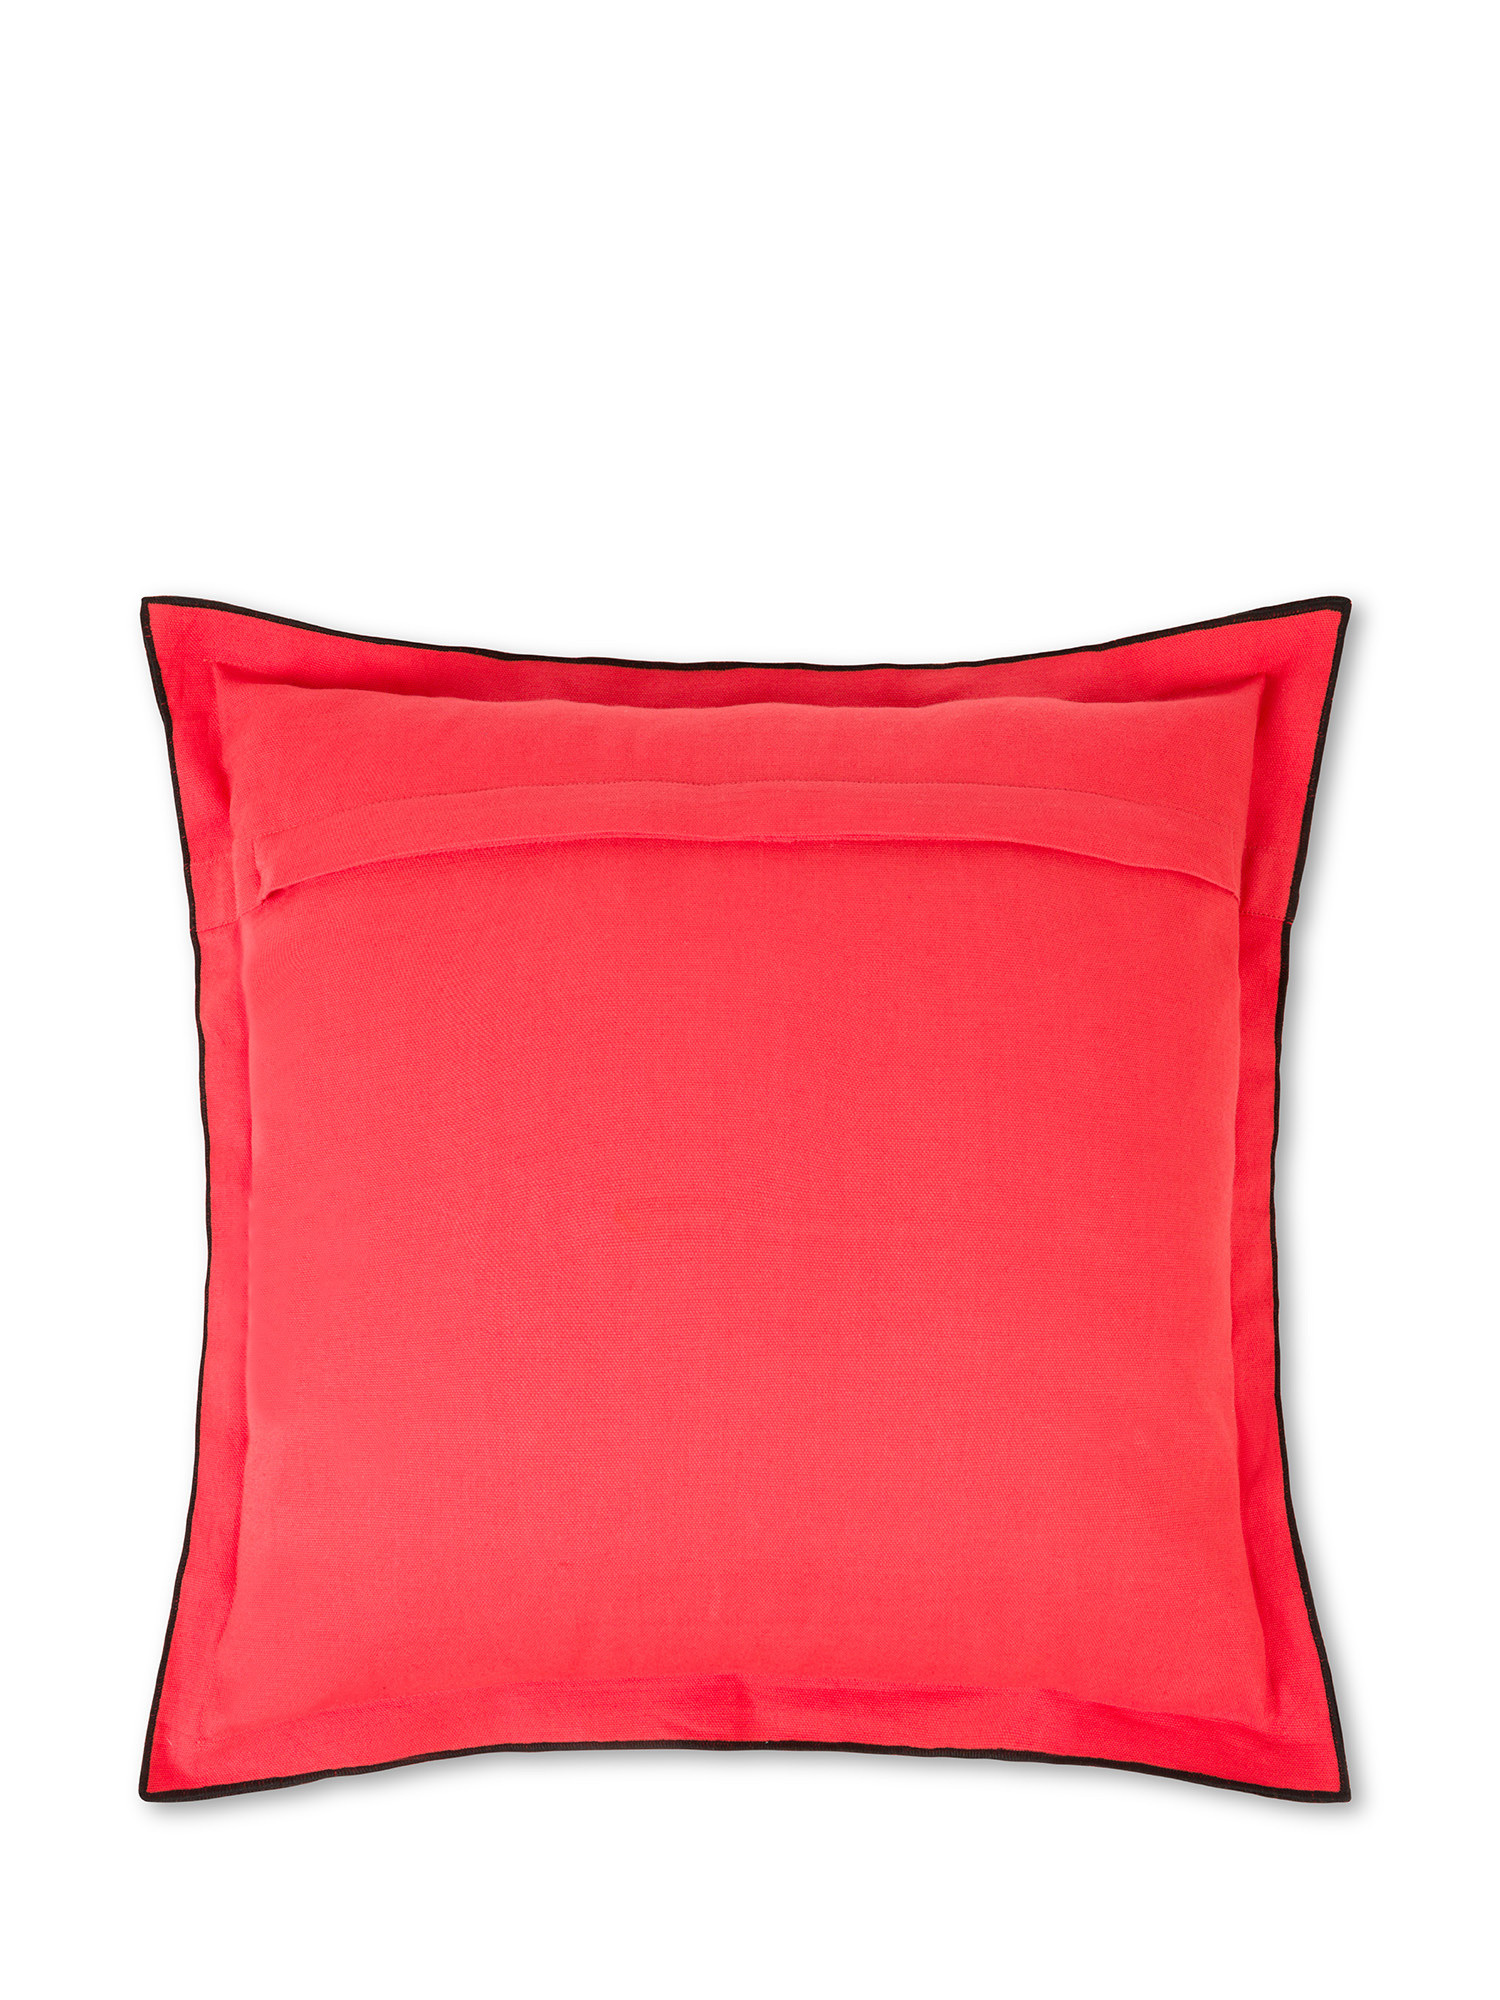 Cotton cushion with overlock border 45x45cm, Red, large image number 1